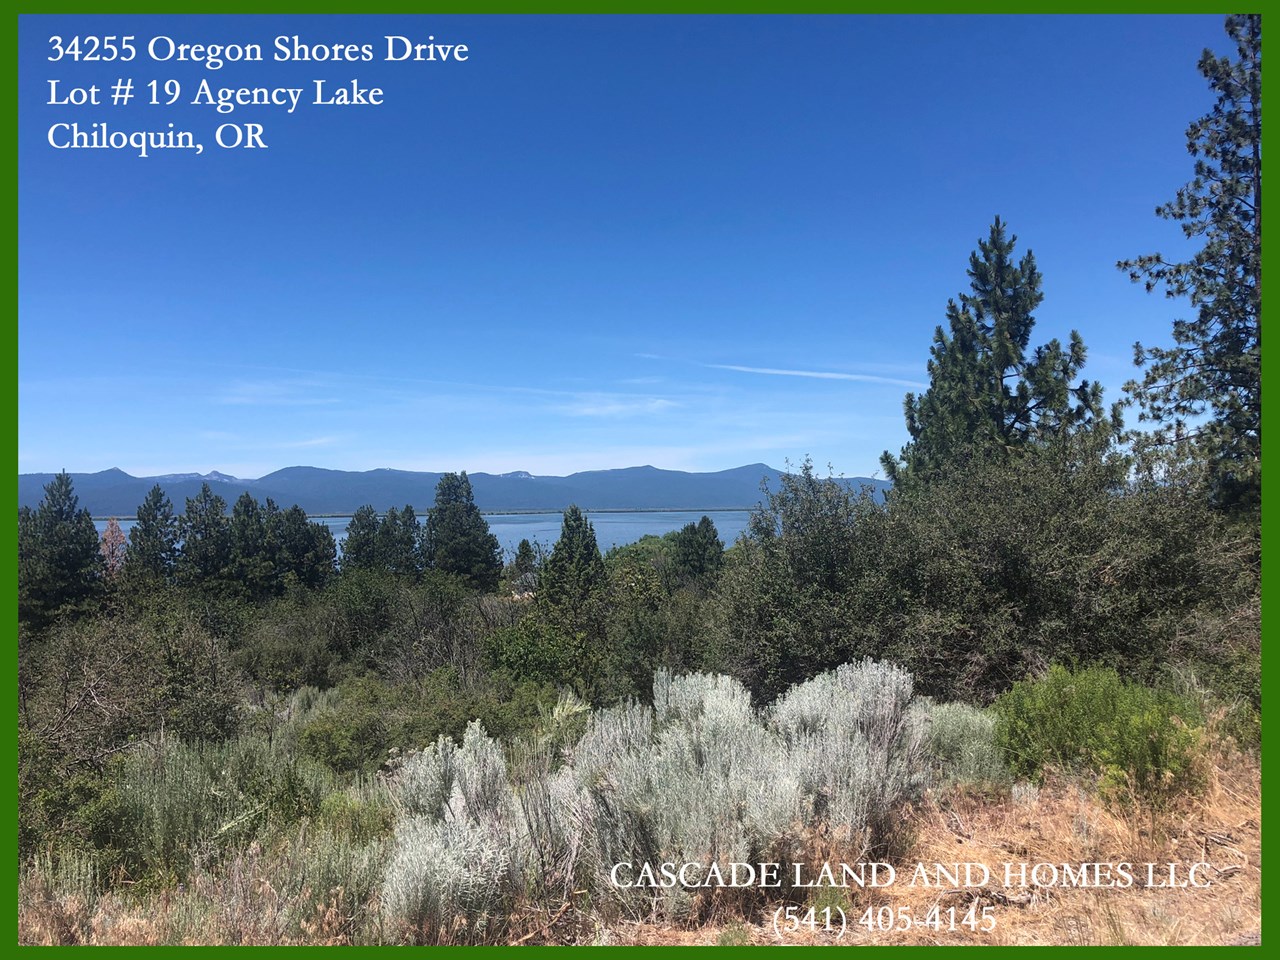 this is just one of the many views you could have from your new home! the views from every angle of the property are gorgeous, agency lake, the mountains and the surrounding foothills offer such a peaceful view!